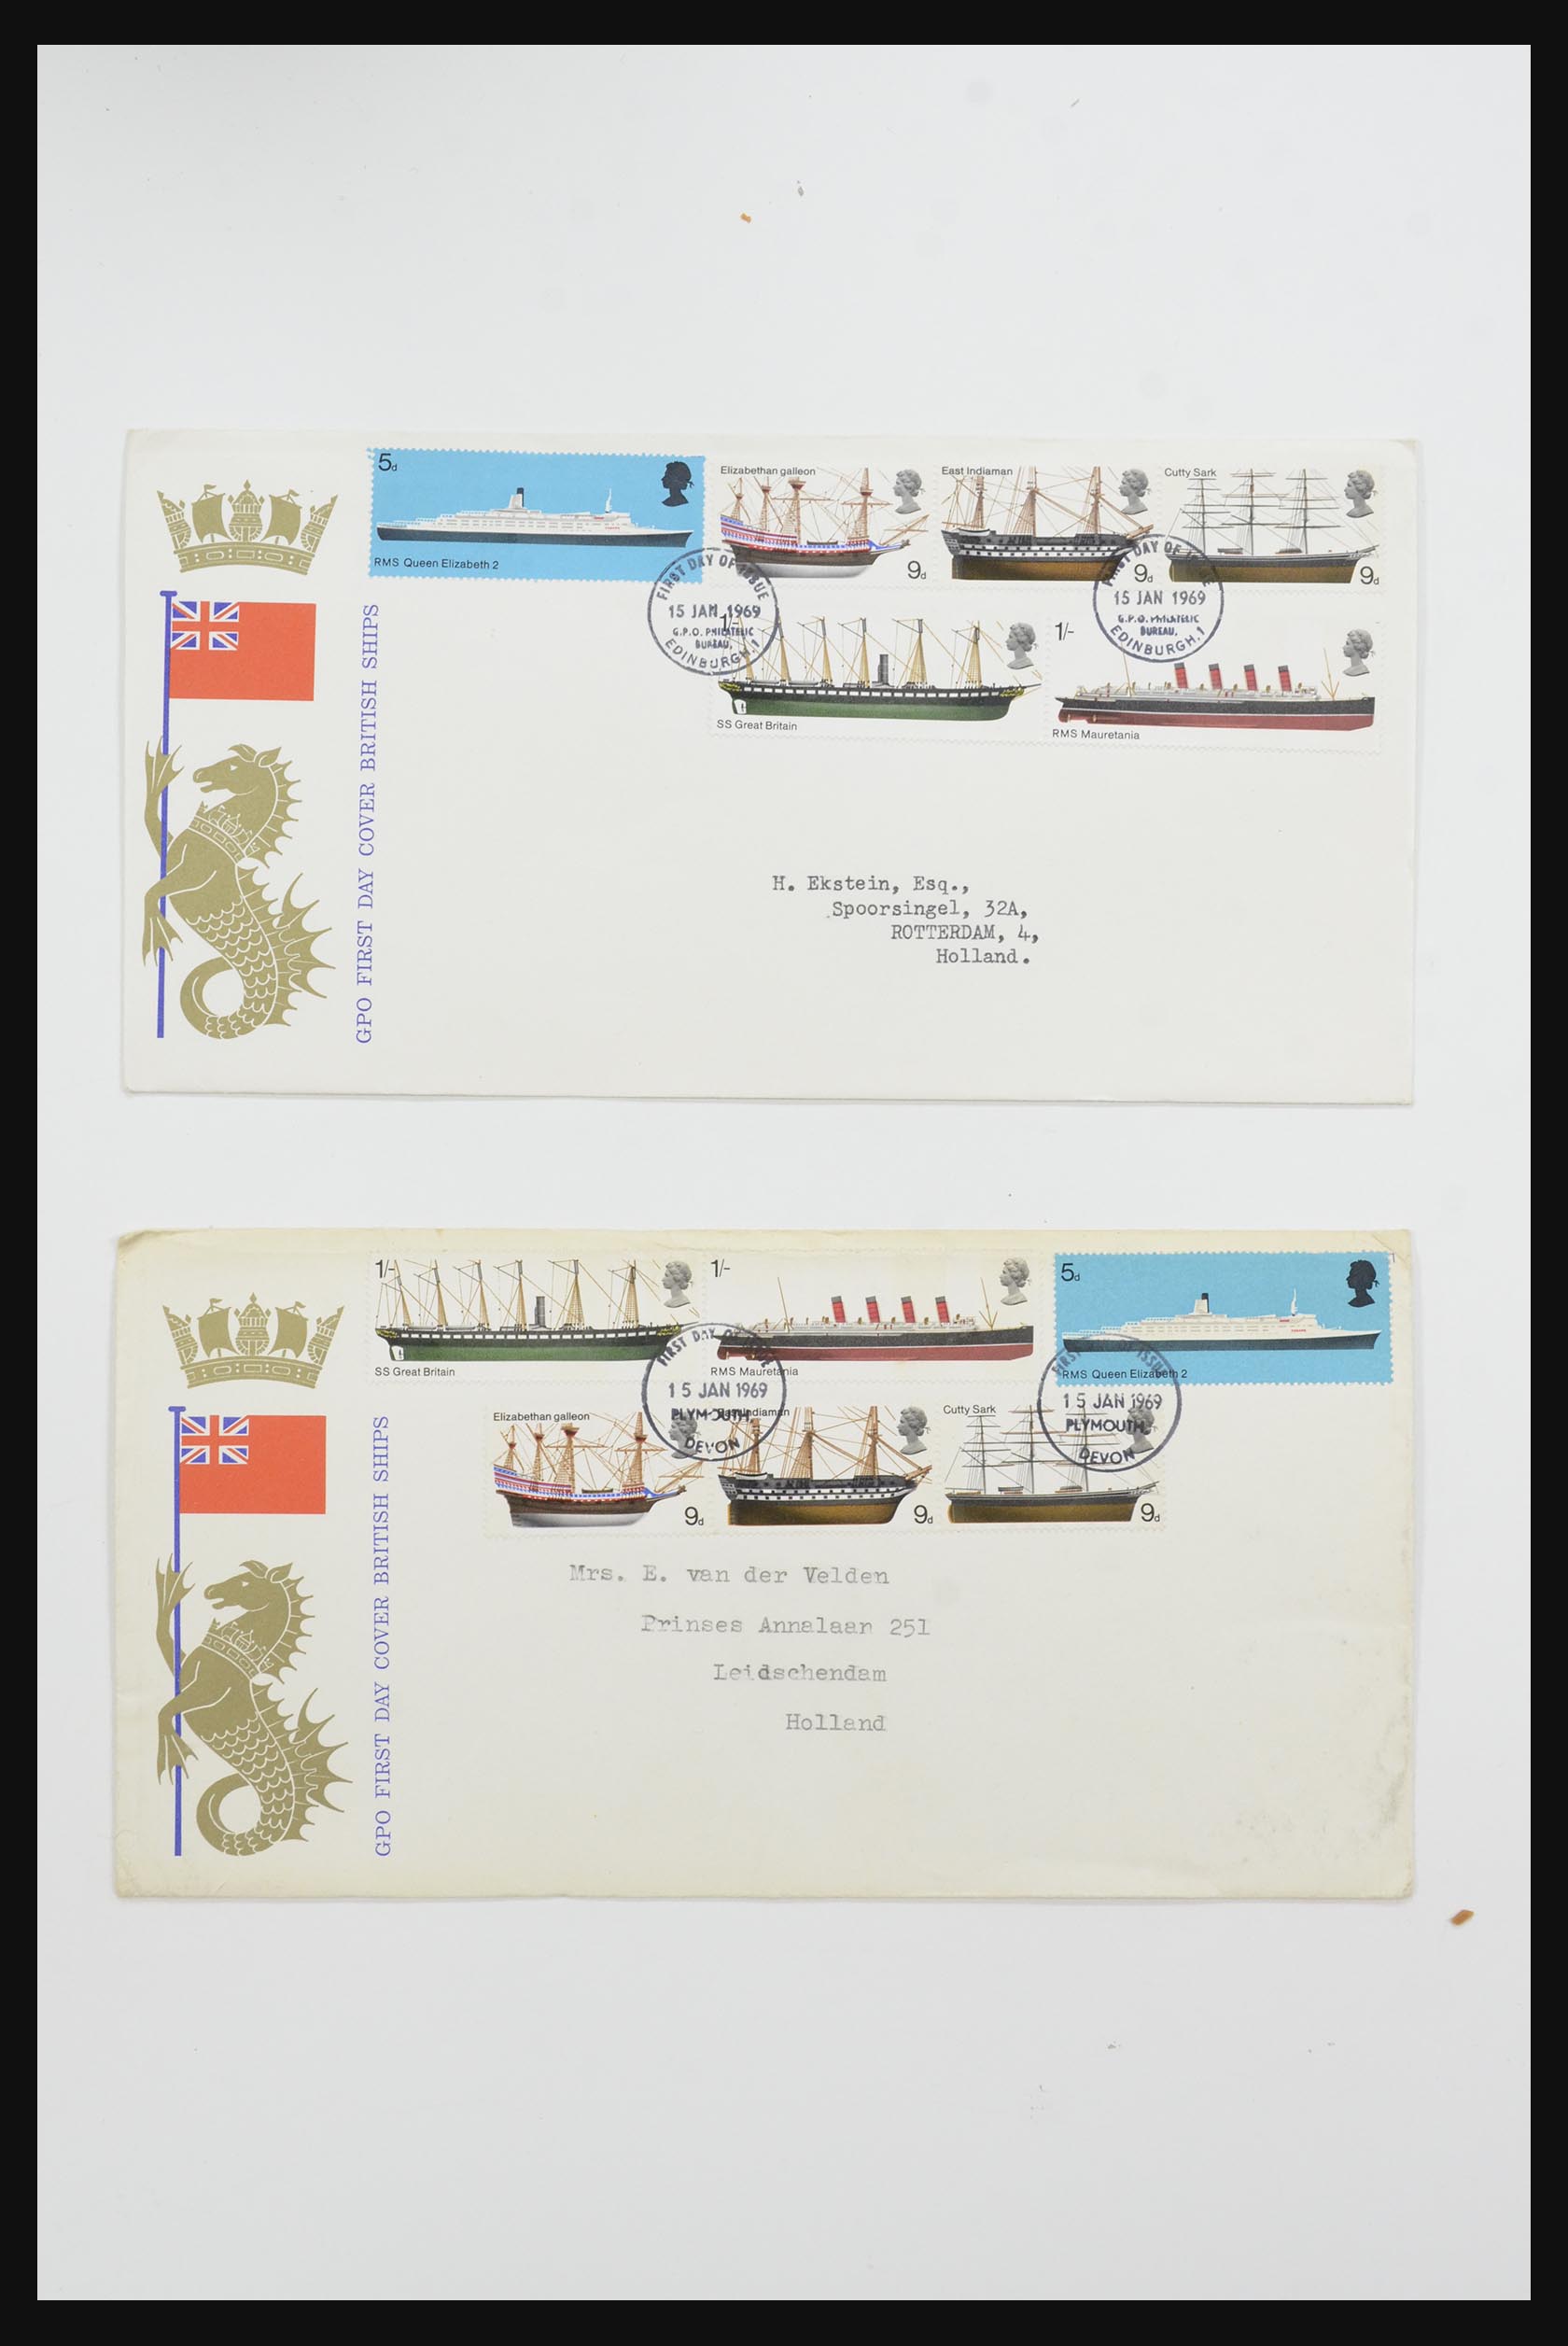 31726 688 - 31726 Great Britain and colonies covers and FDC's 1937-2001.